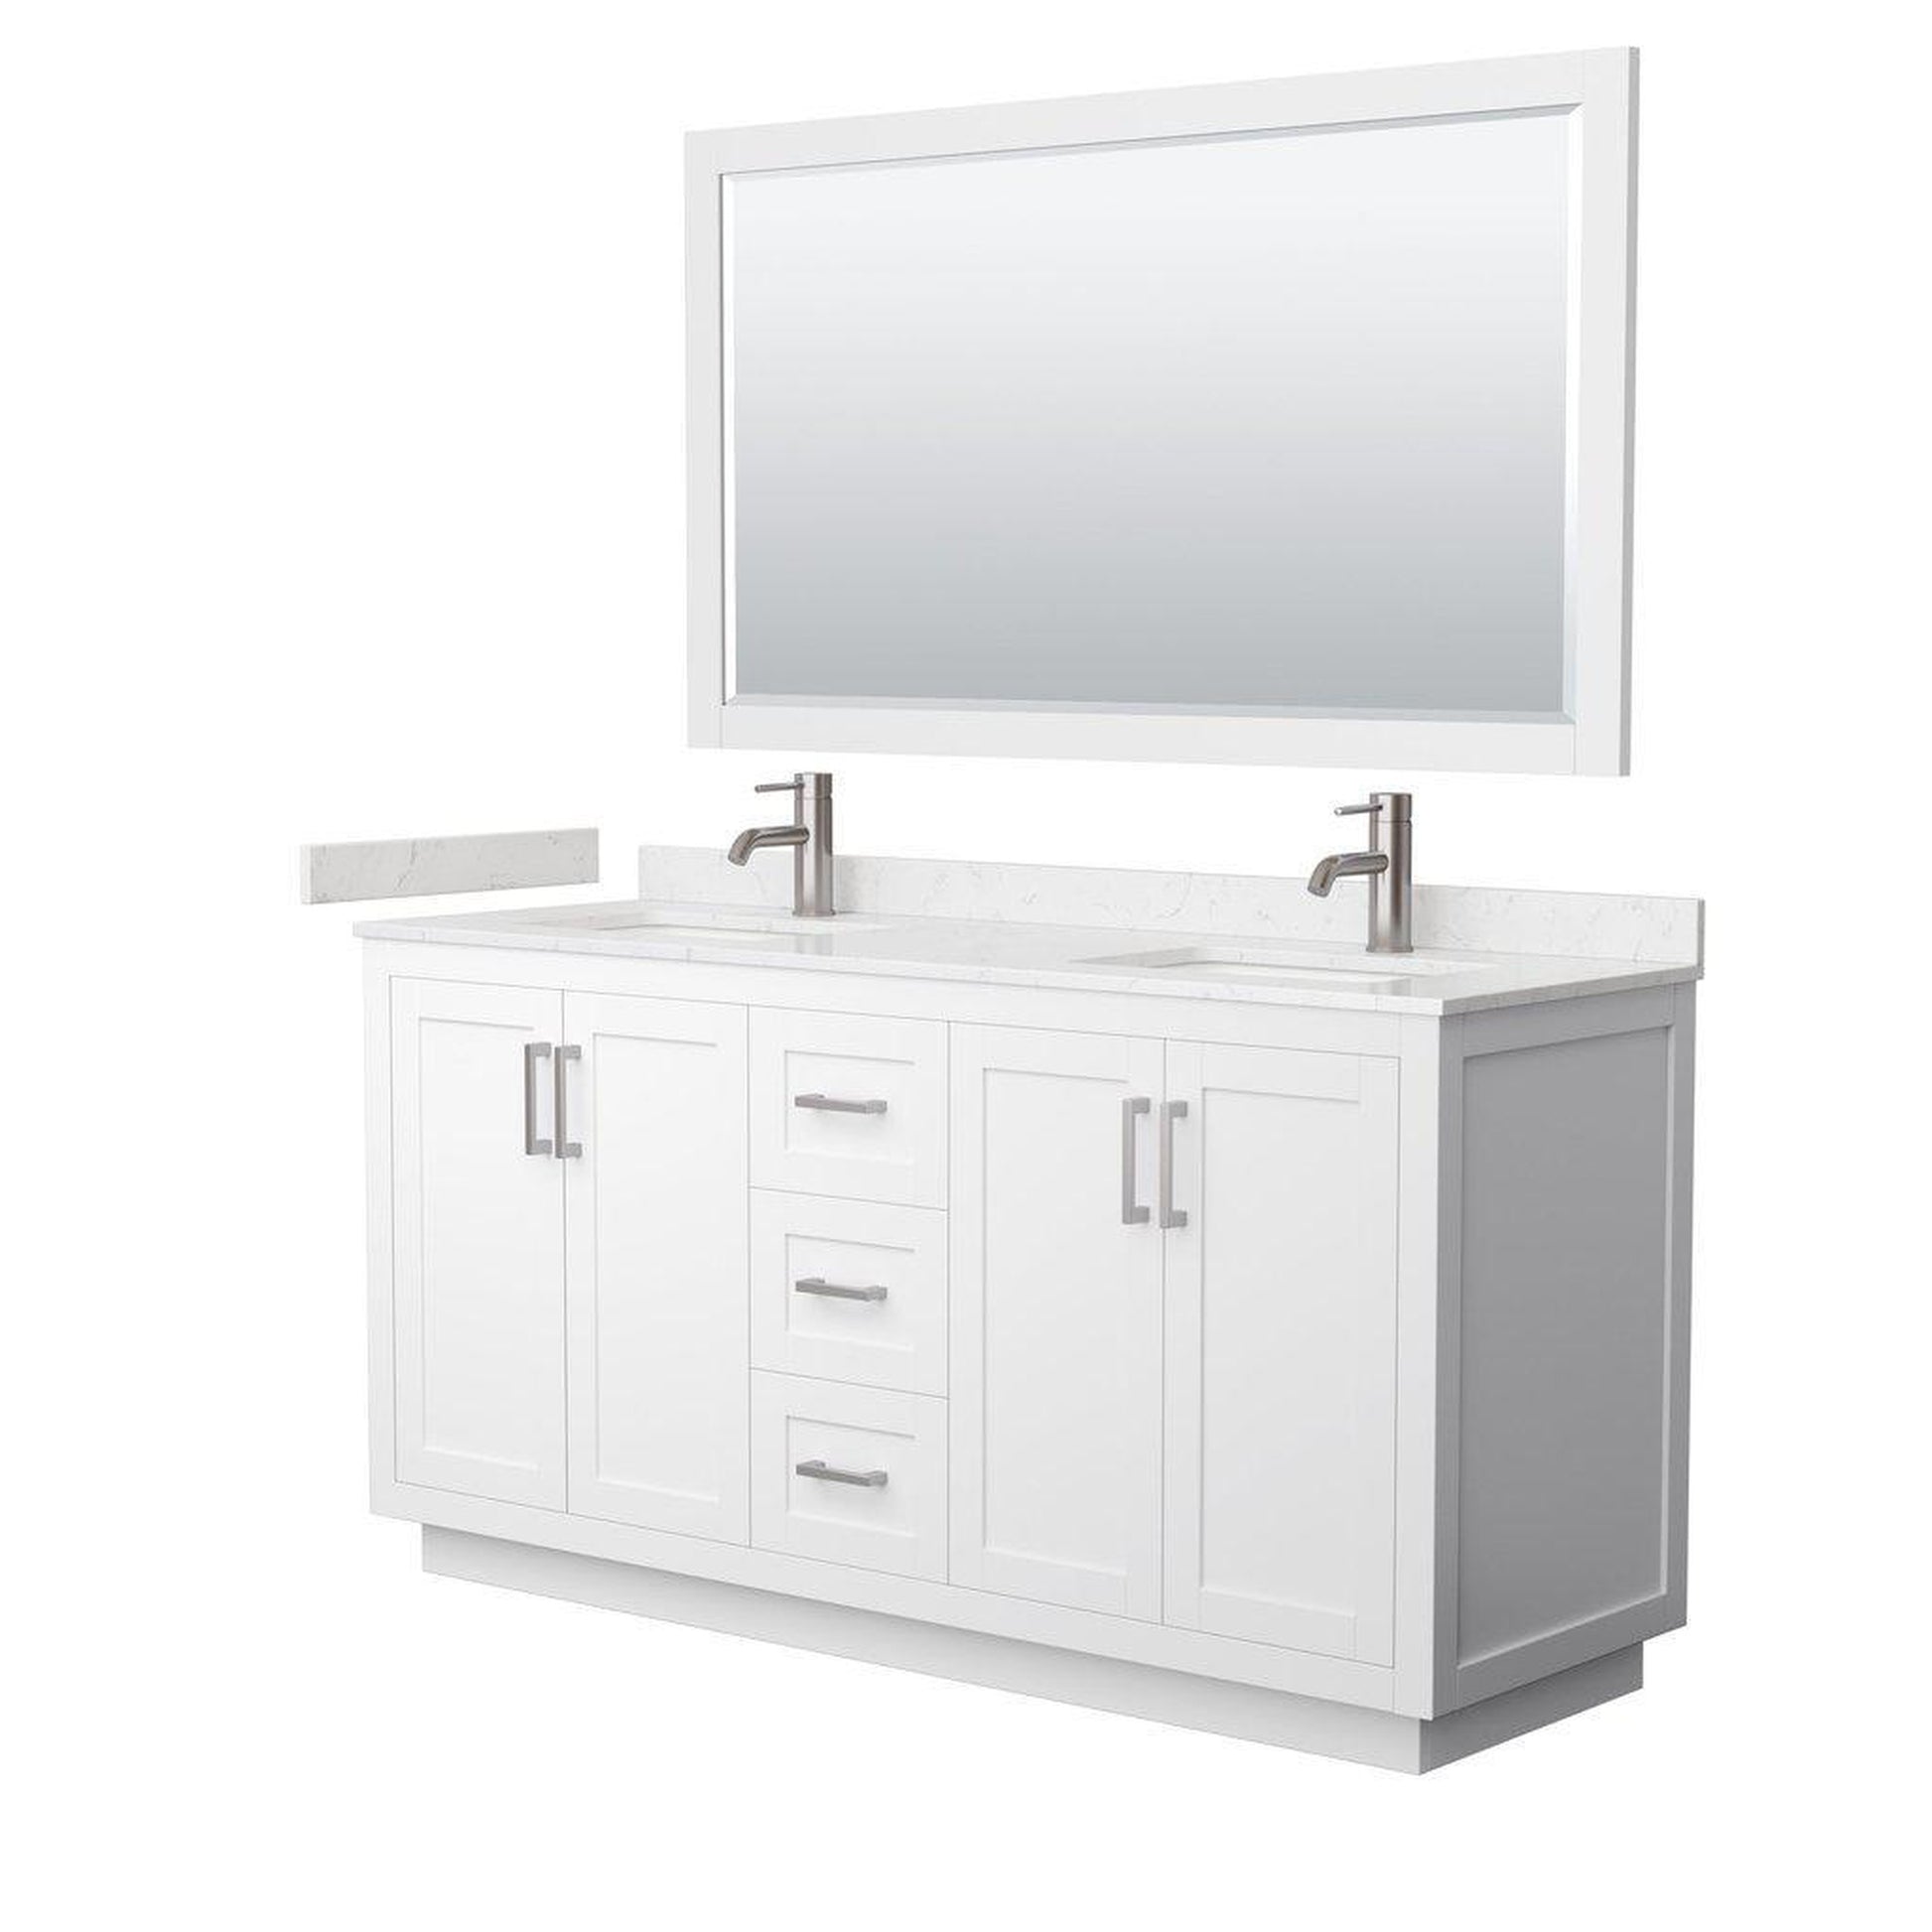 Wyndham Collection Miranda 66" Double Bathroom White Vanity Set With Light-Vein Carrara Cultured Marble Countertop, Undermount Square Sink, 58" Mirror And Brushed Nickel Trim